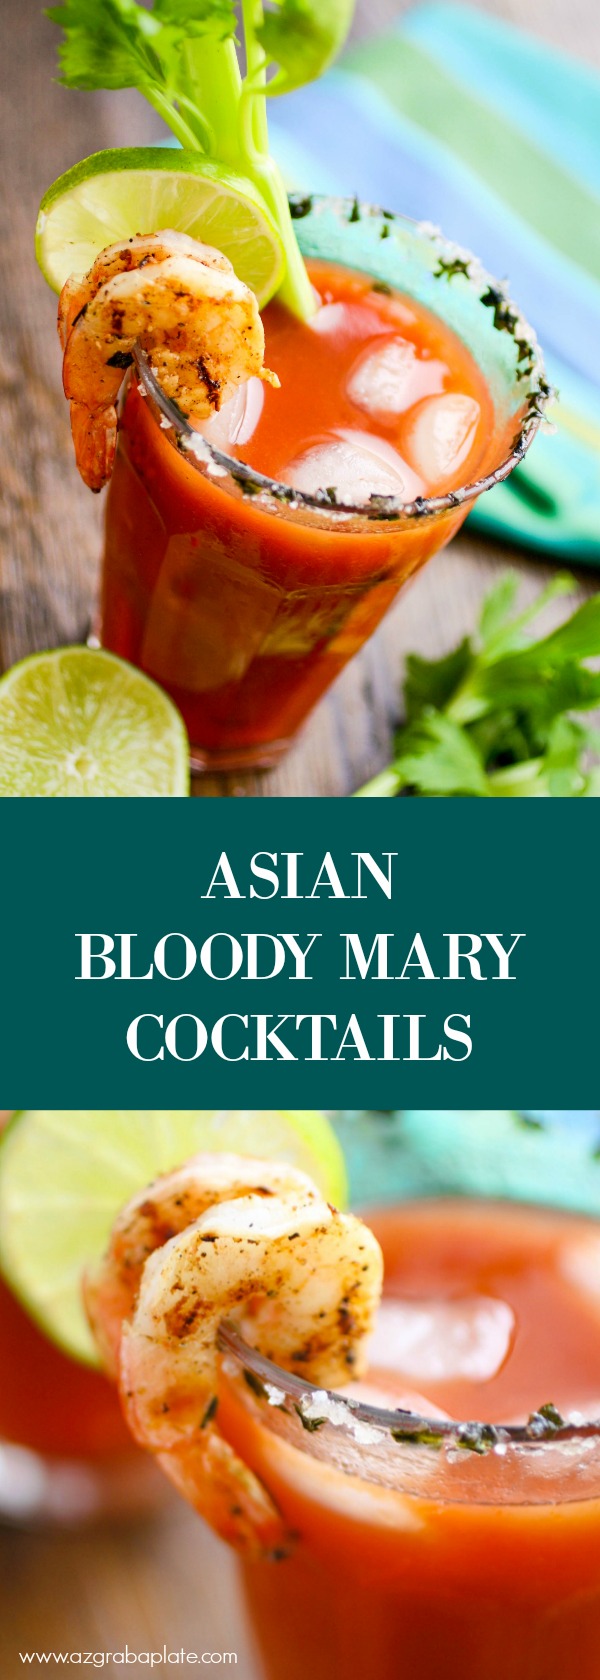 Asian Bloody Mary Cocktails are a fun cocktail to whip up for brunch. Your guests will love them!